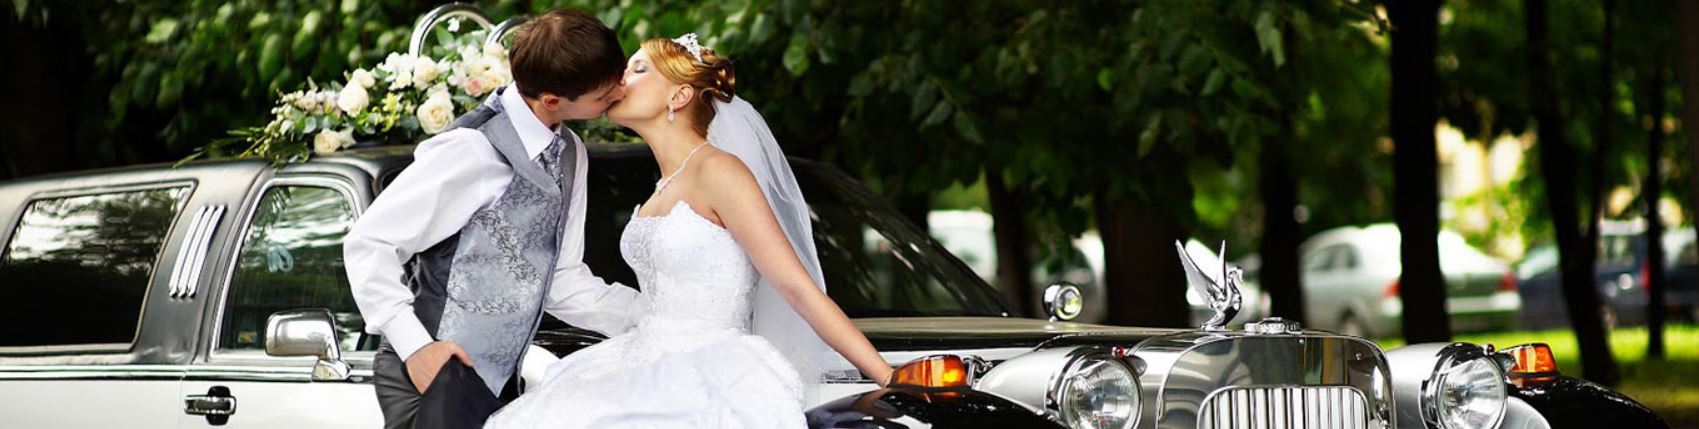 Los Angeles Bachelor or Bachelorette party limo rental services